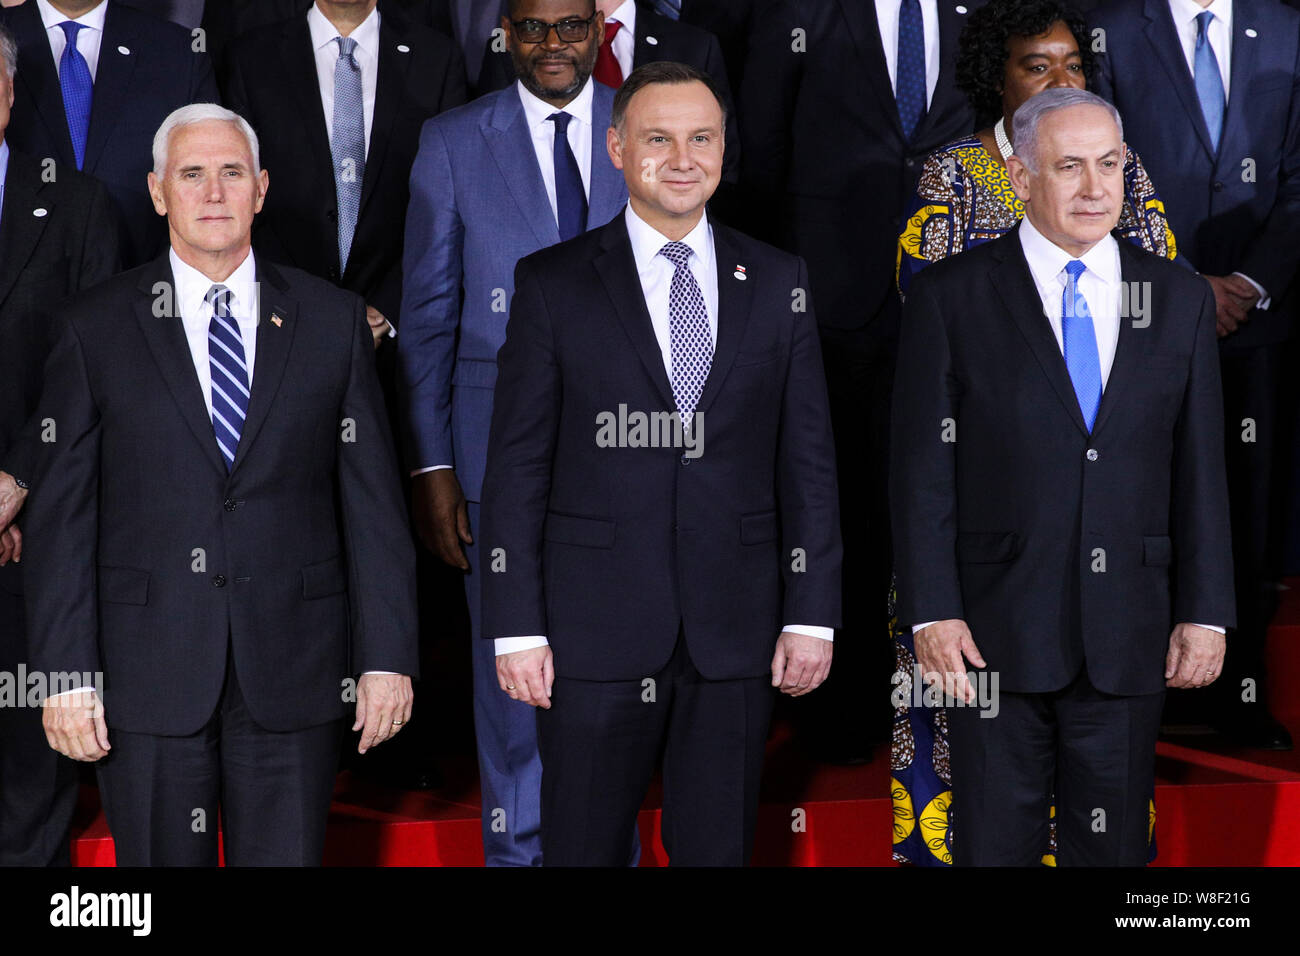 Warszawa, 13.02.2019. U.S. Vice President Mike Pence, Polish President  Andrzej Duda and Israeli Prime Minister Benjamin Netanyahu during the  family photo at the Middle East conference at the Royal Castle in Warsaw.